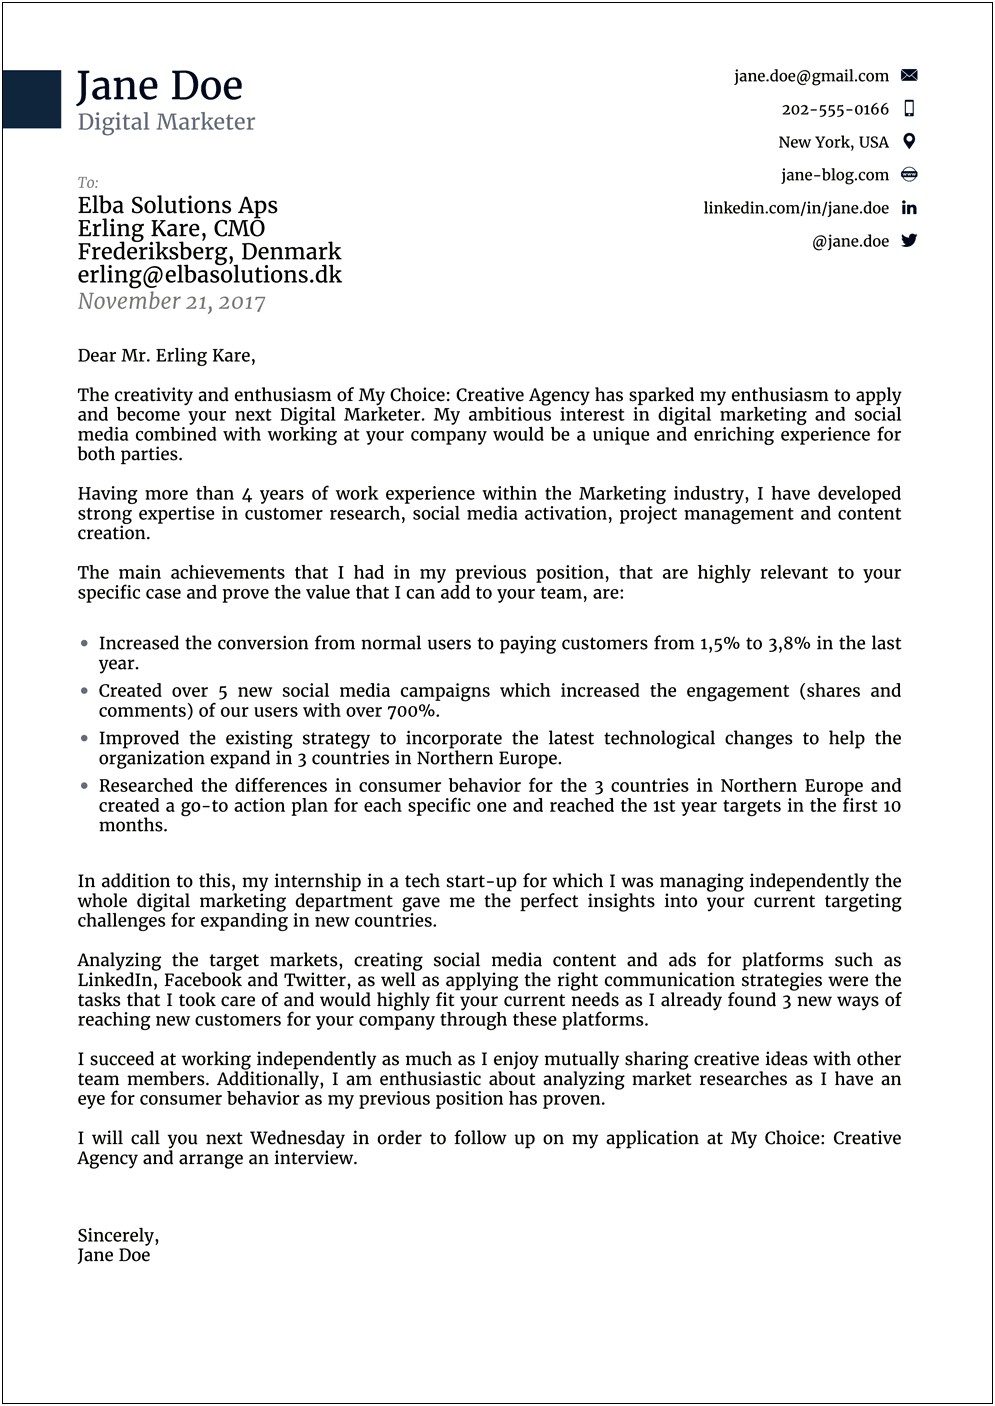 Application For Employment Cover Letter Template